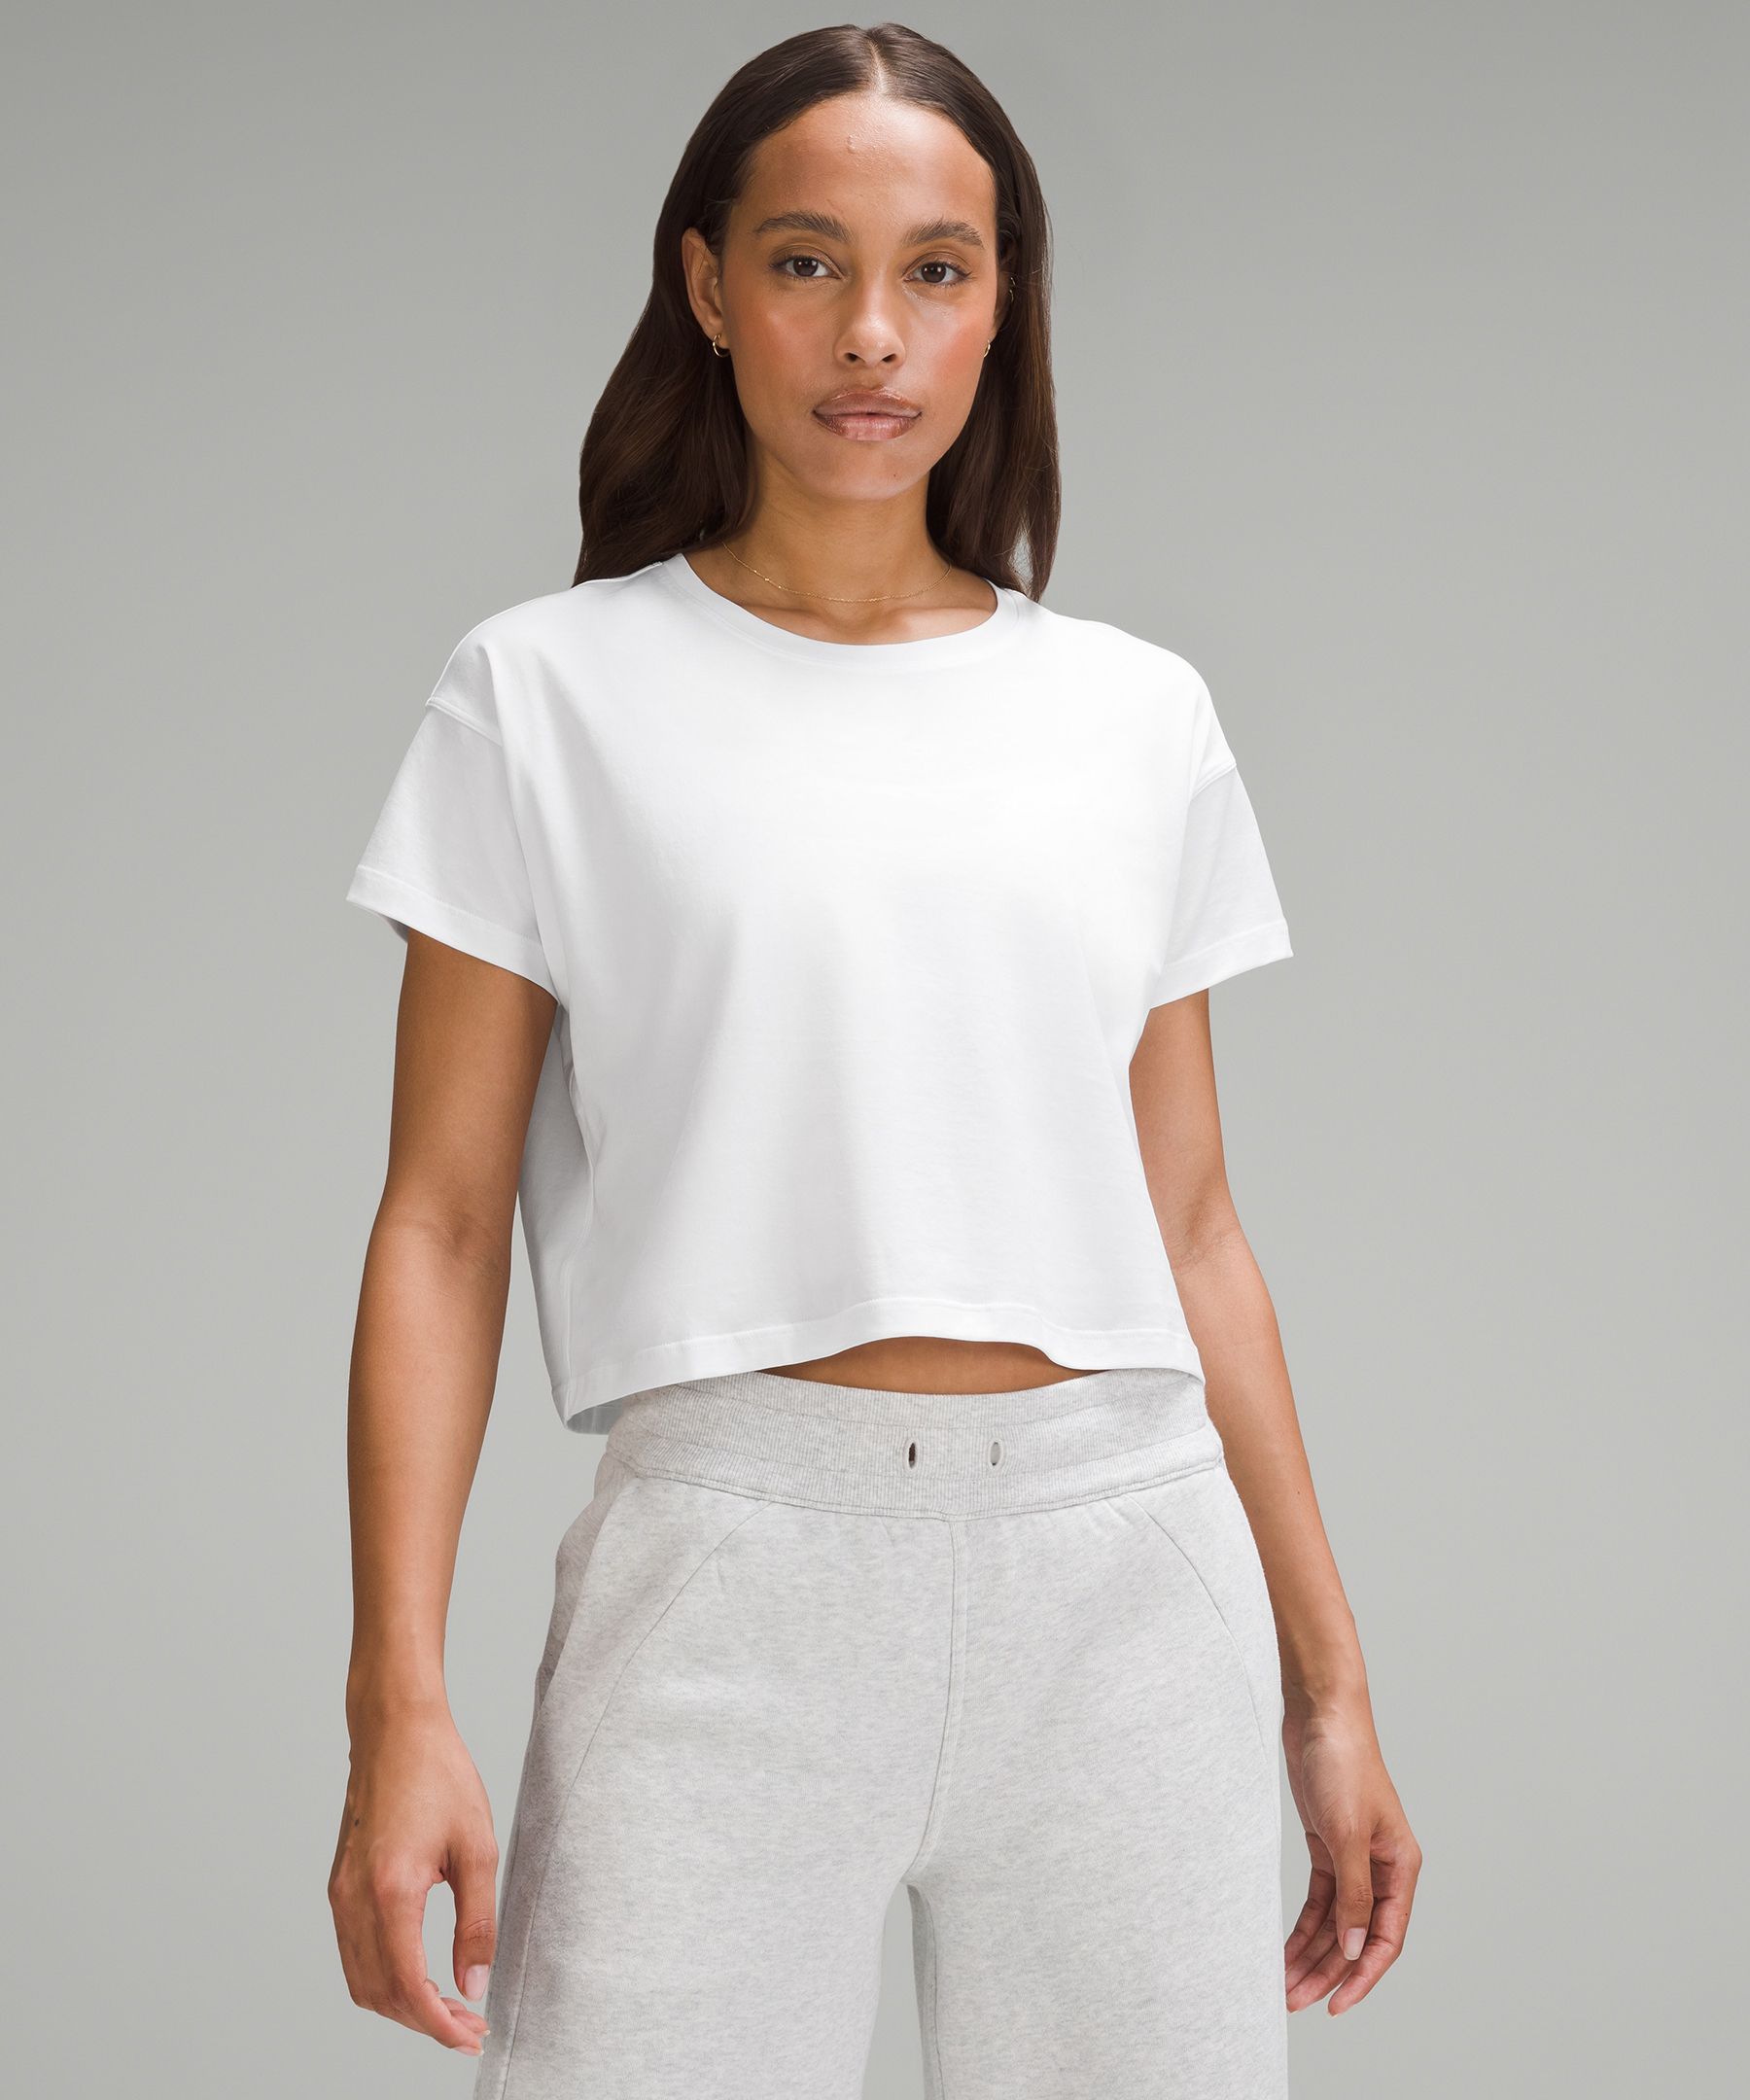 melt the lad work cropped tops